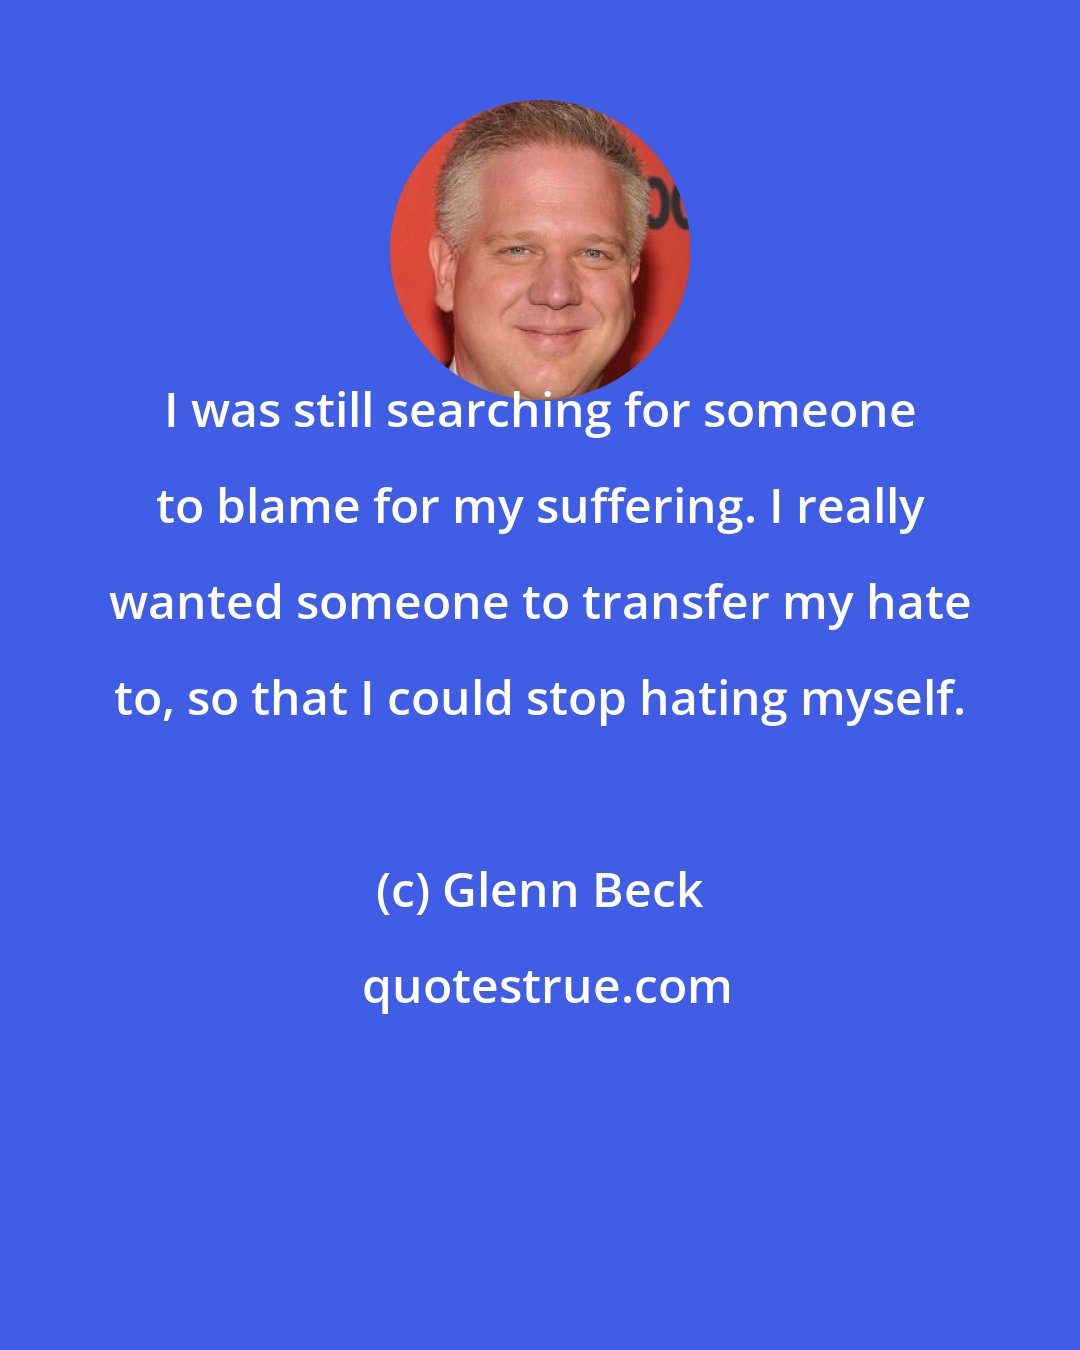 Glenn Beck: I was still searching for someone to blame for my suffering. I really wanted someone to transfer my hate to, so that I could stop hating myself.